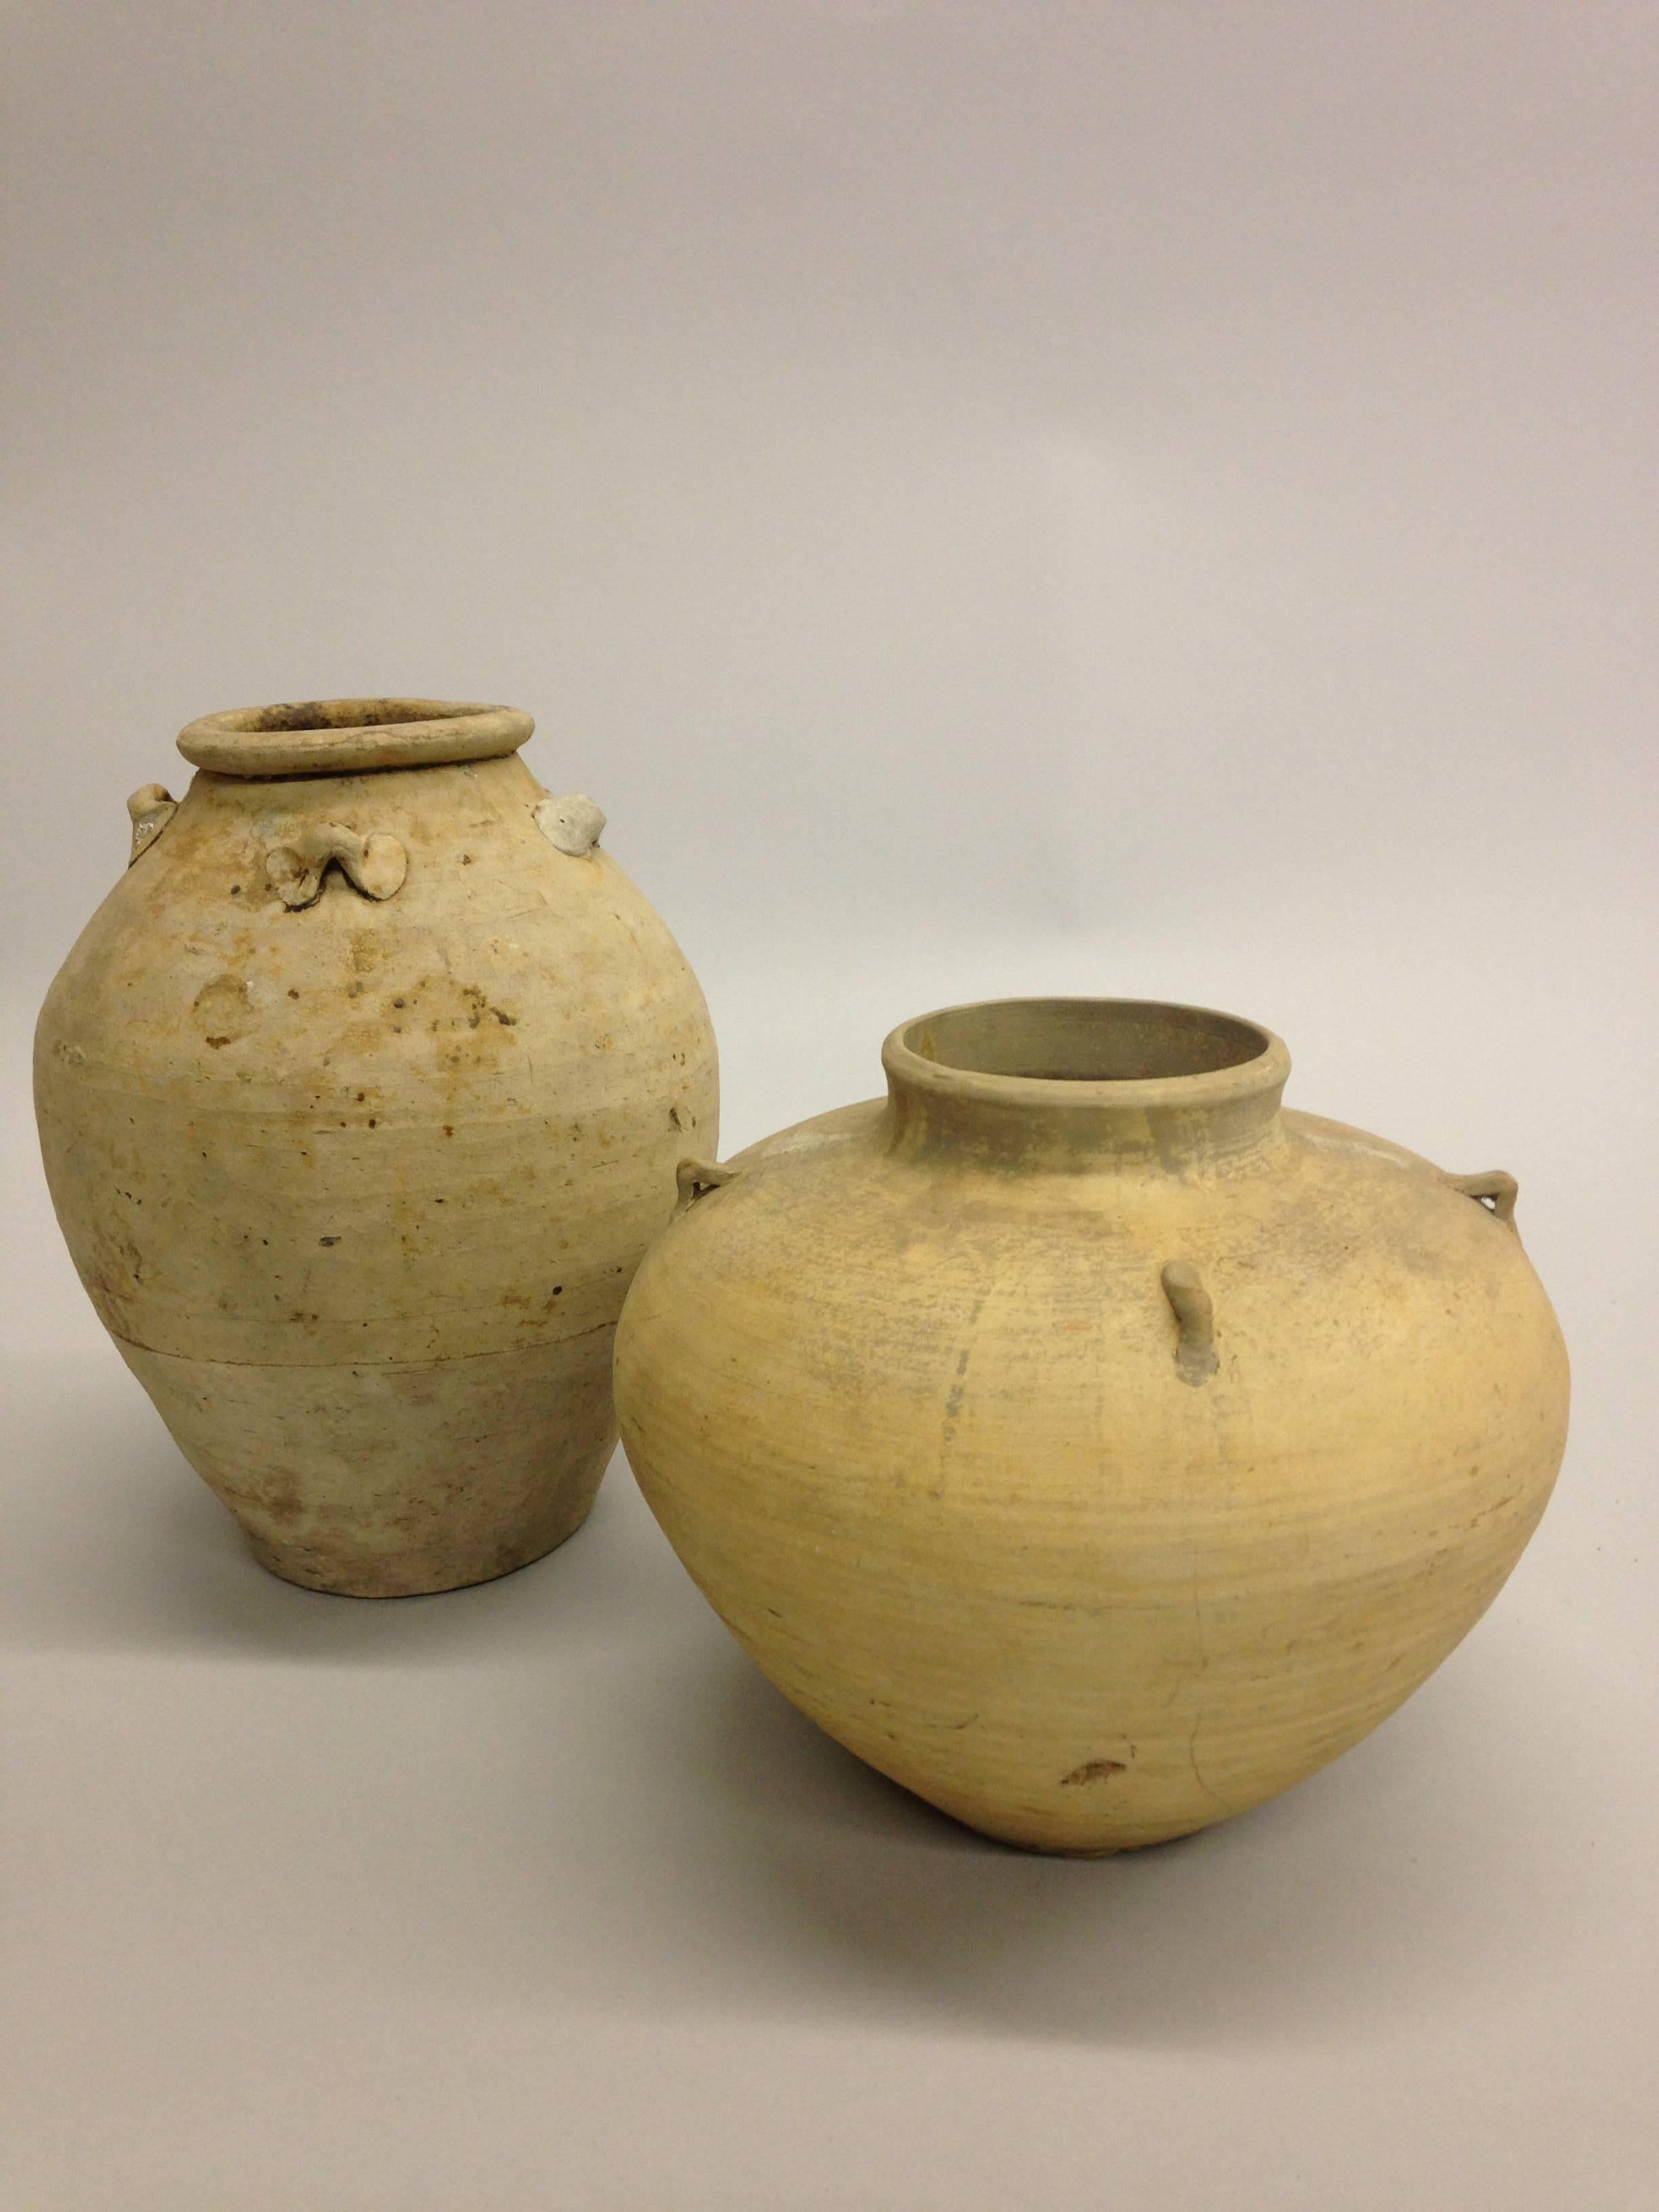 Two ancient khmer urns or vases. 

Dimensions: H 10.38 x D 8.5 and H 7.5 x D 9

Priced and sold individually. 

References: Pottery, ceramics, tribal, rustic, table ware, objects, centrepieces, jars, bottles, bowls.